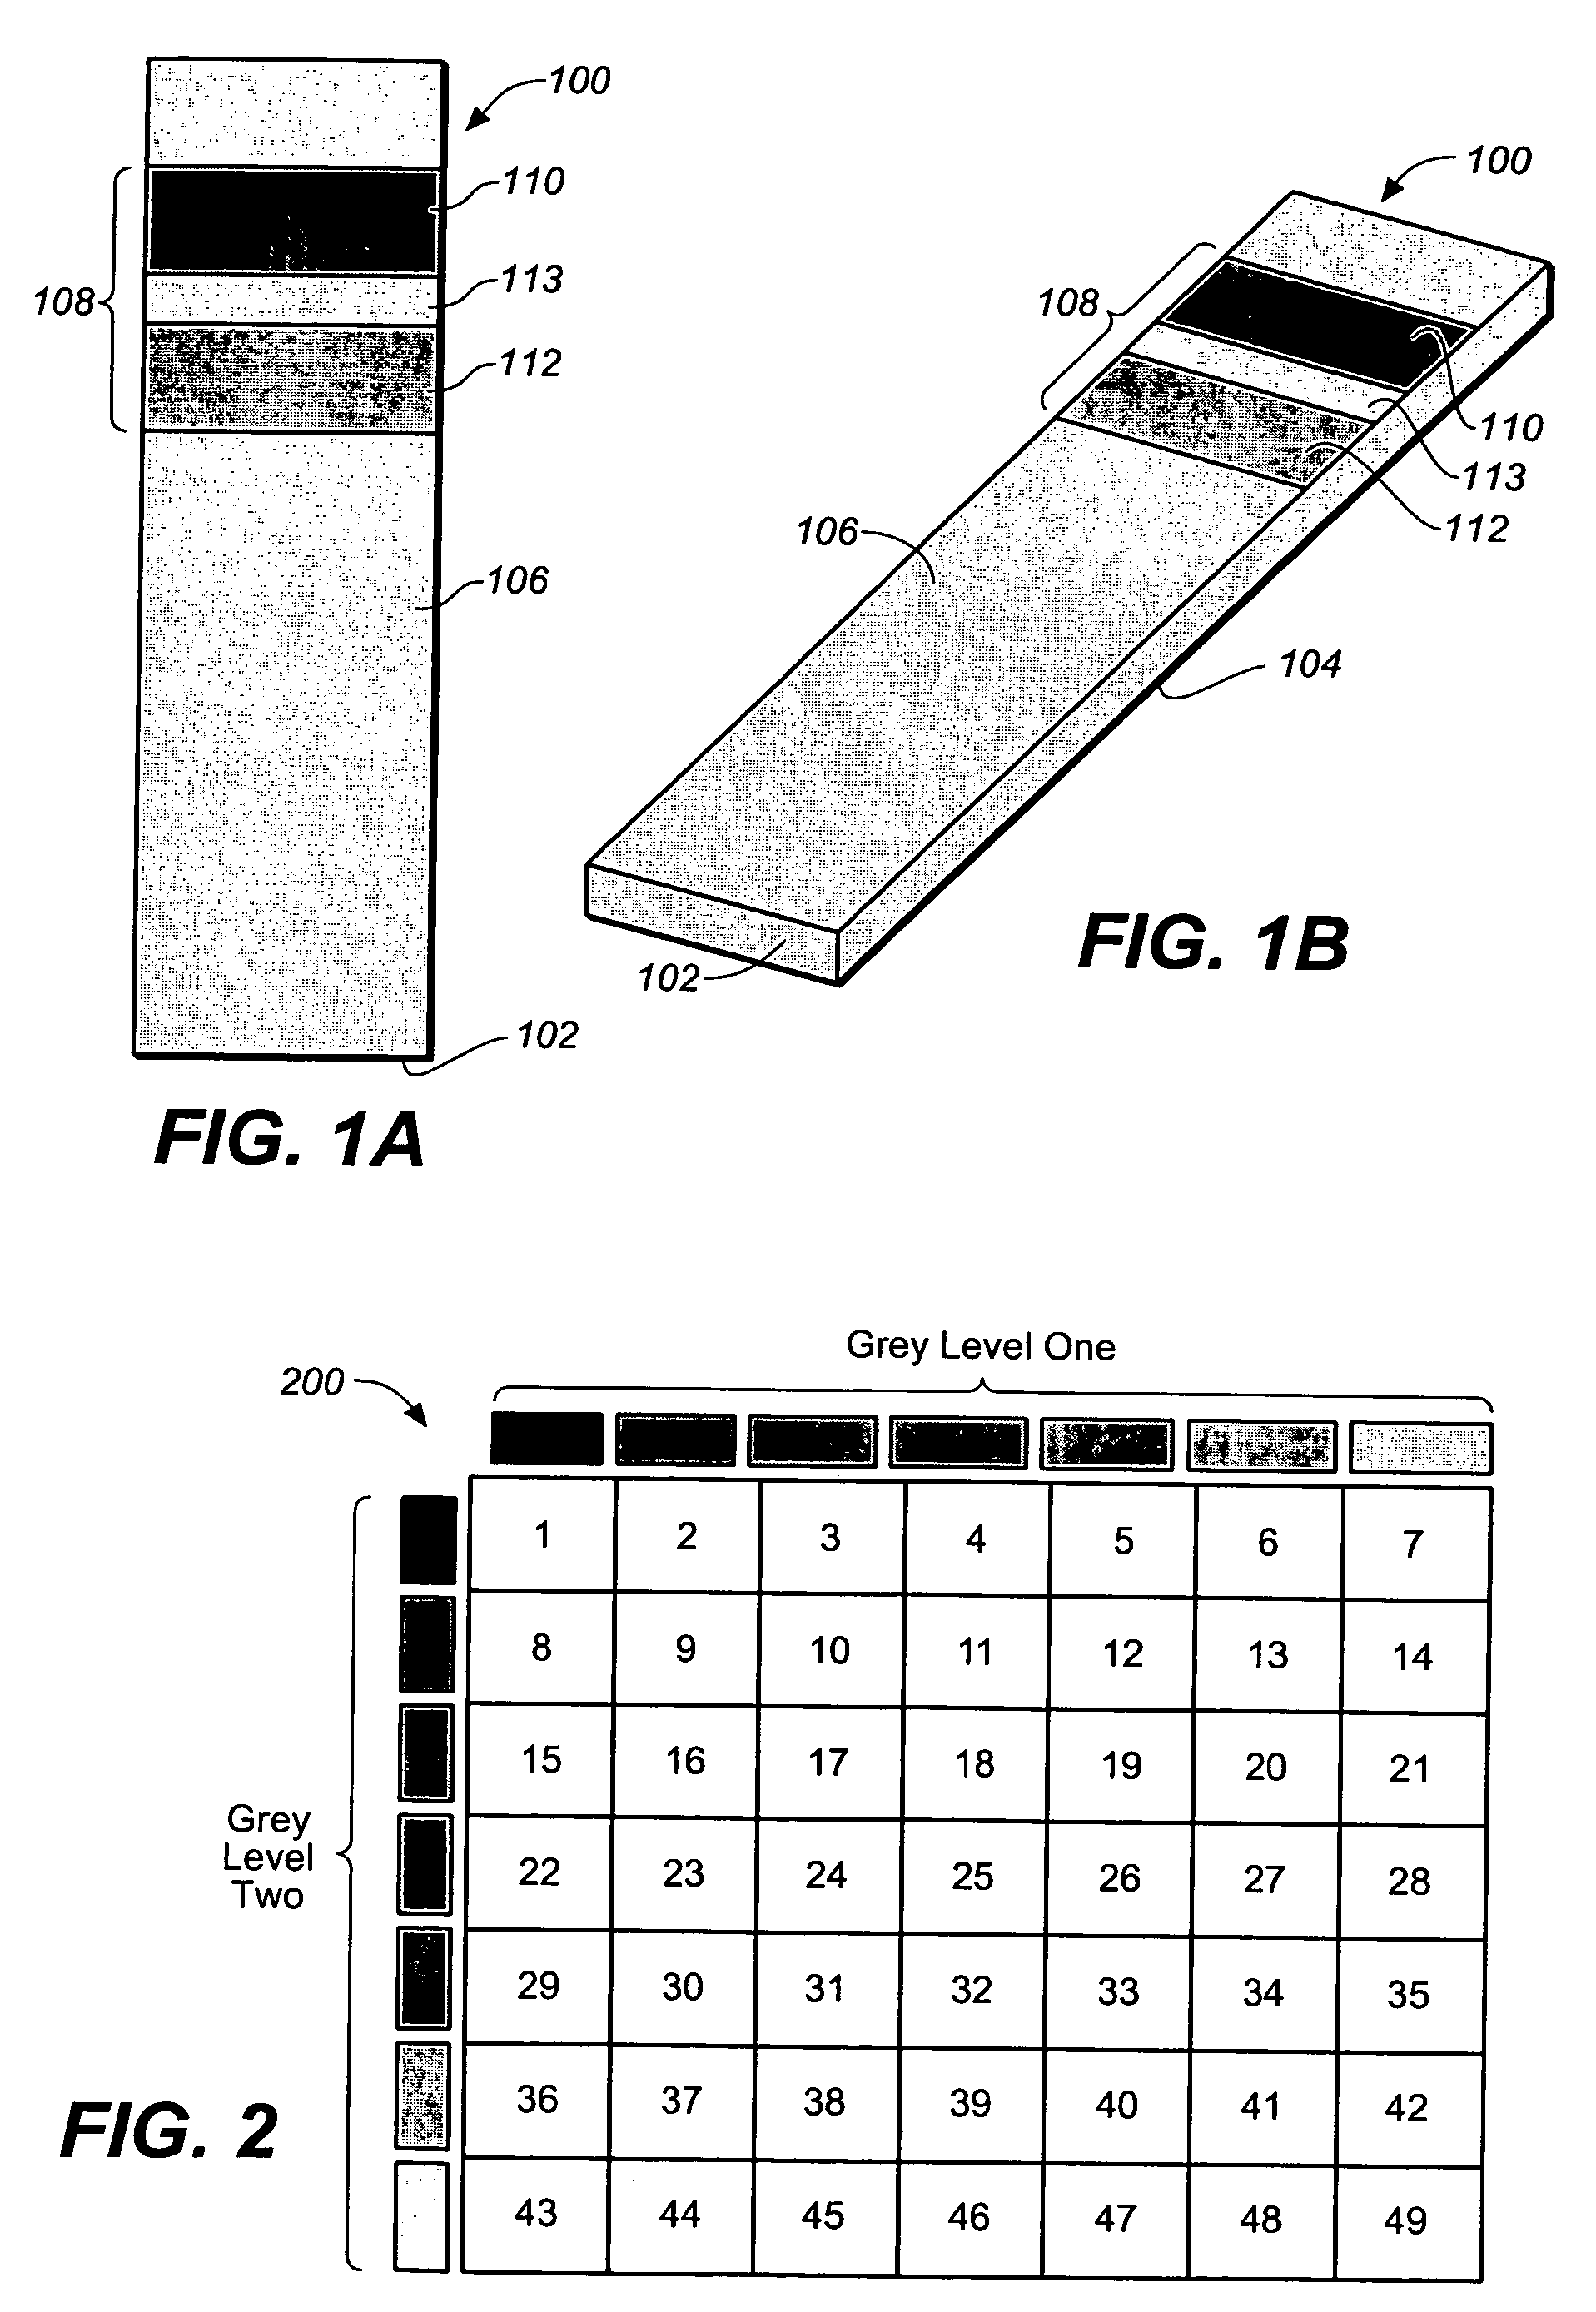 Method for determining a test strip calibration code for use in a meter